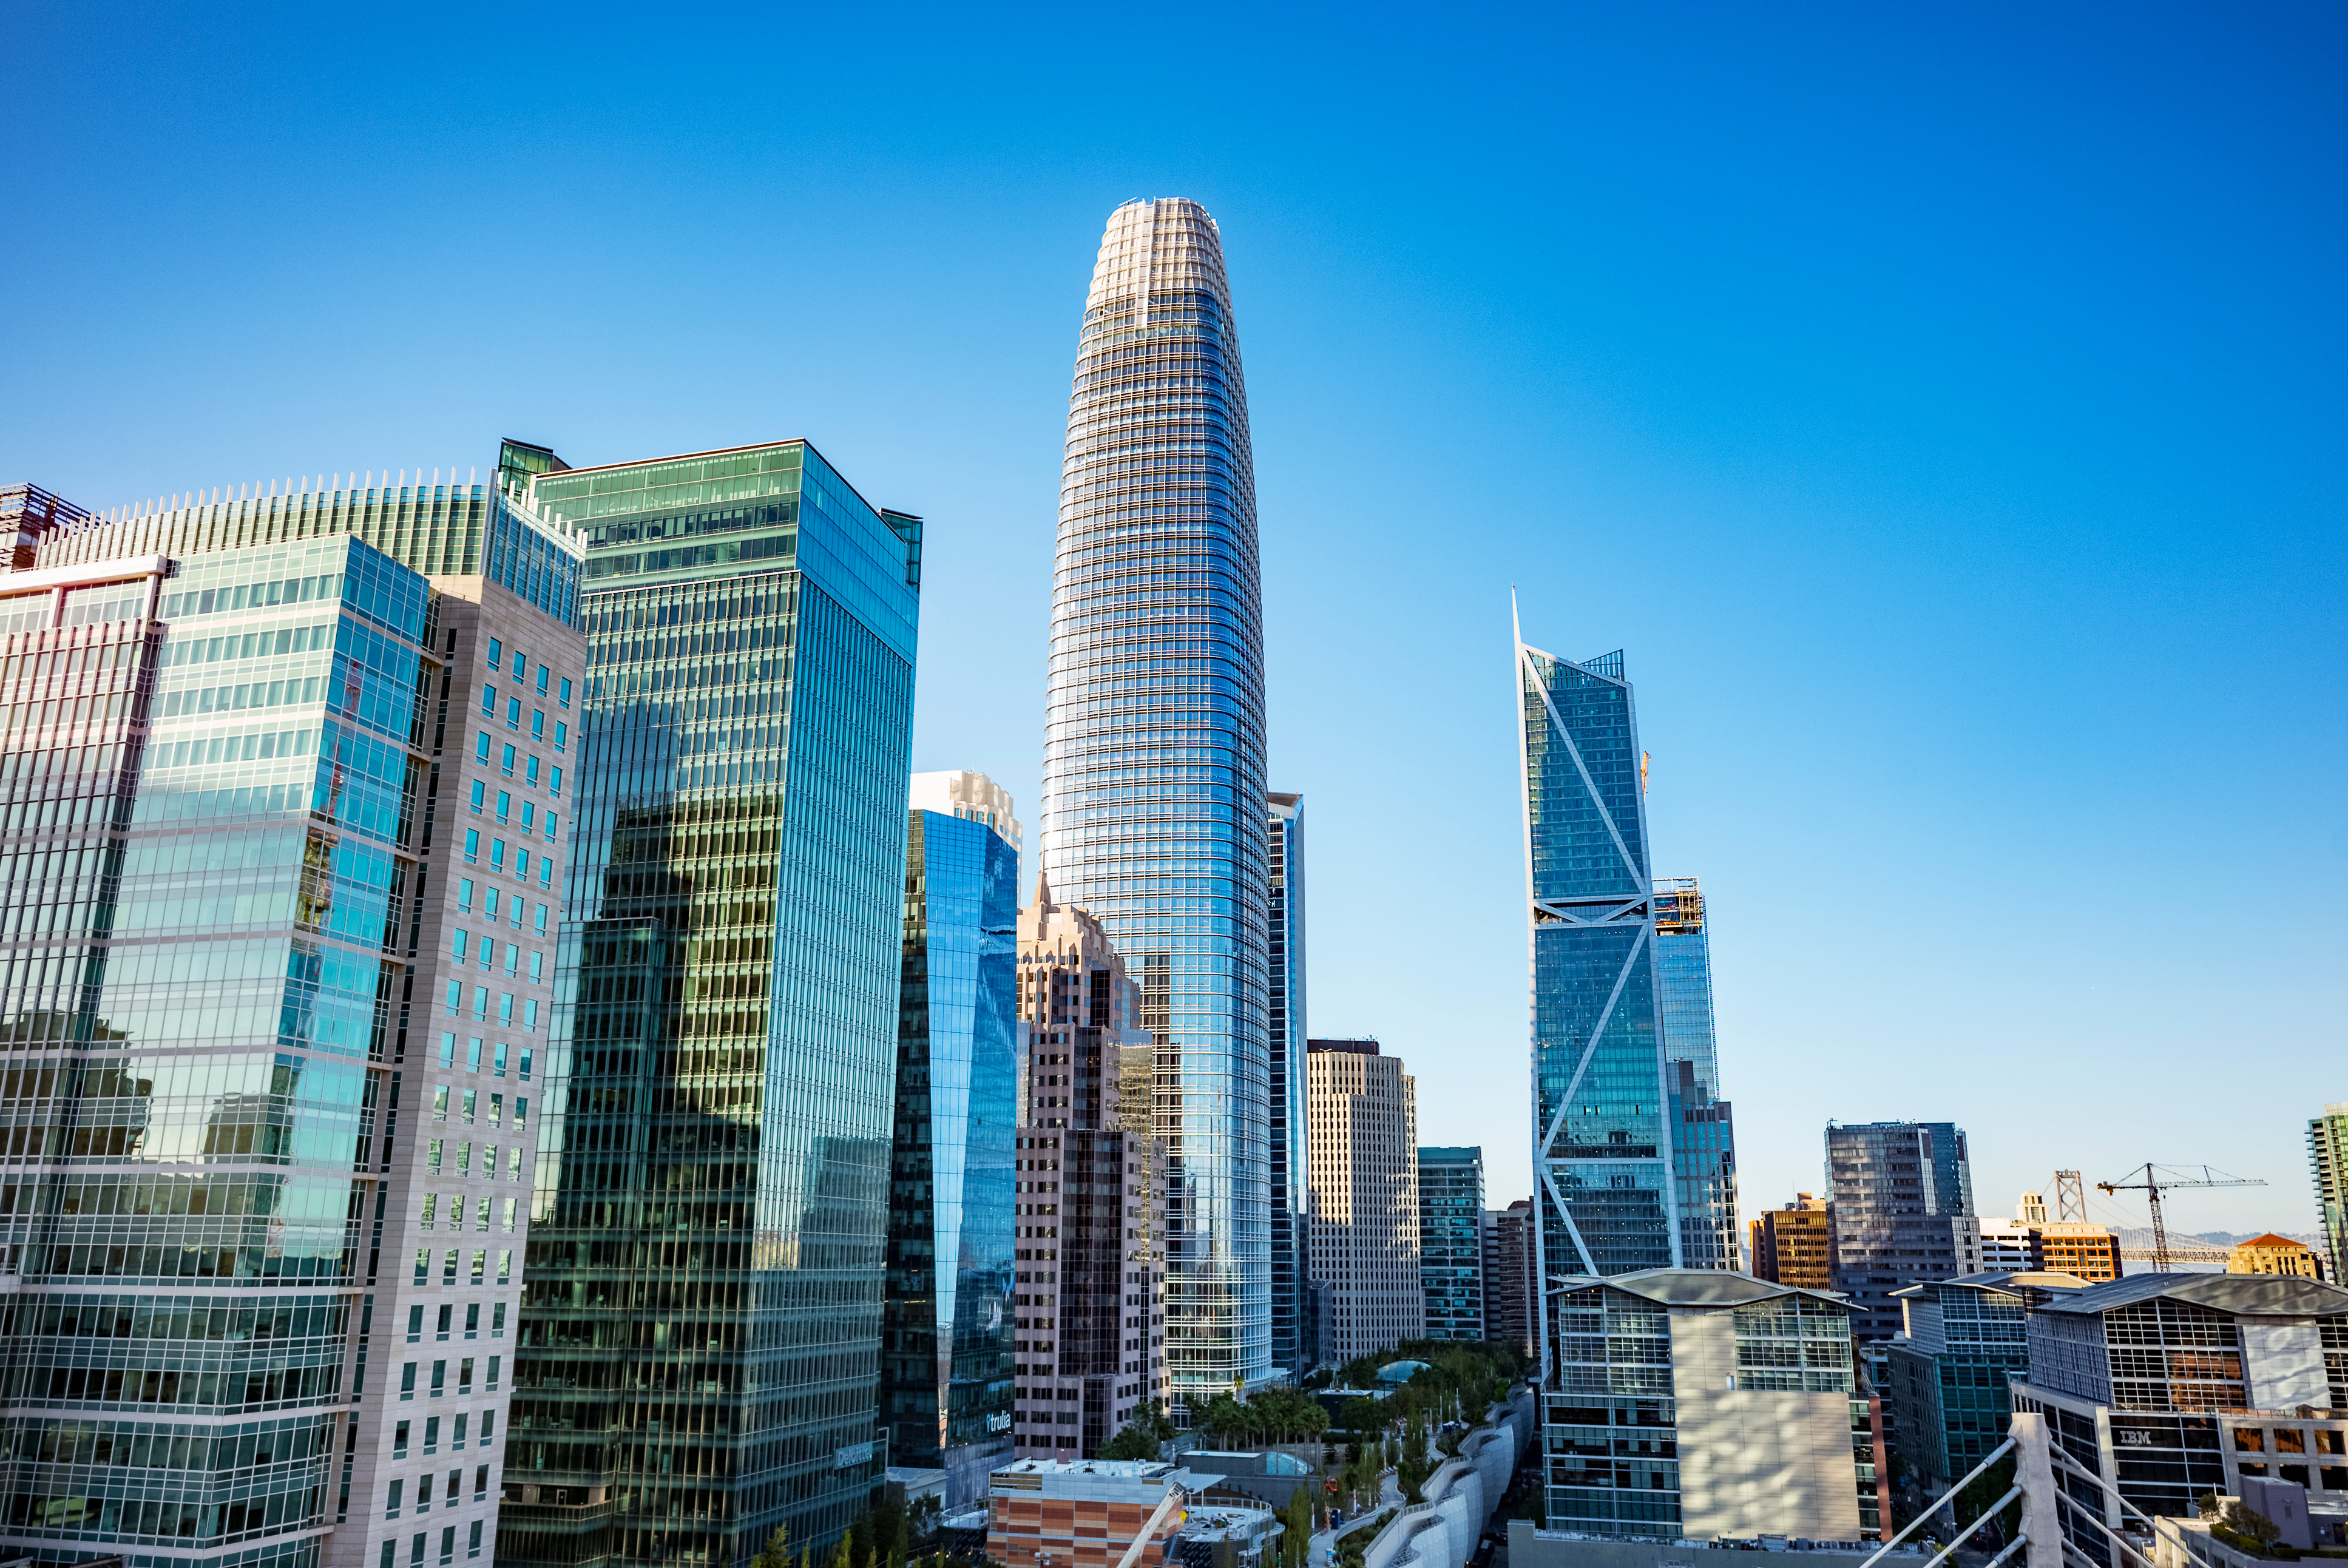 Salesforce Tower tours open